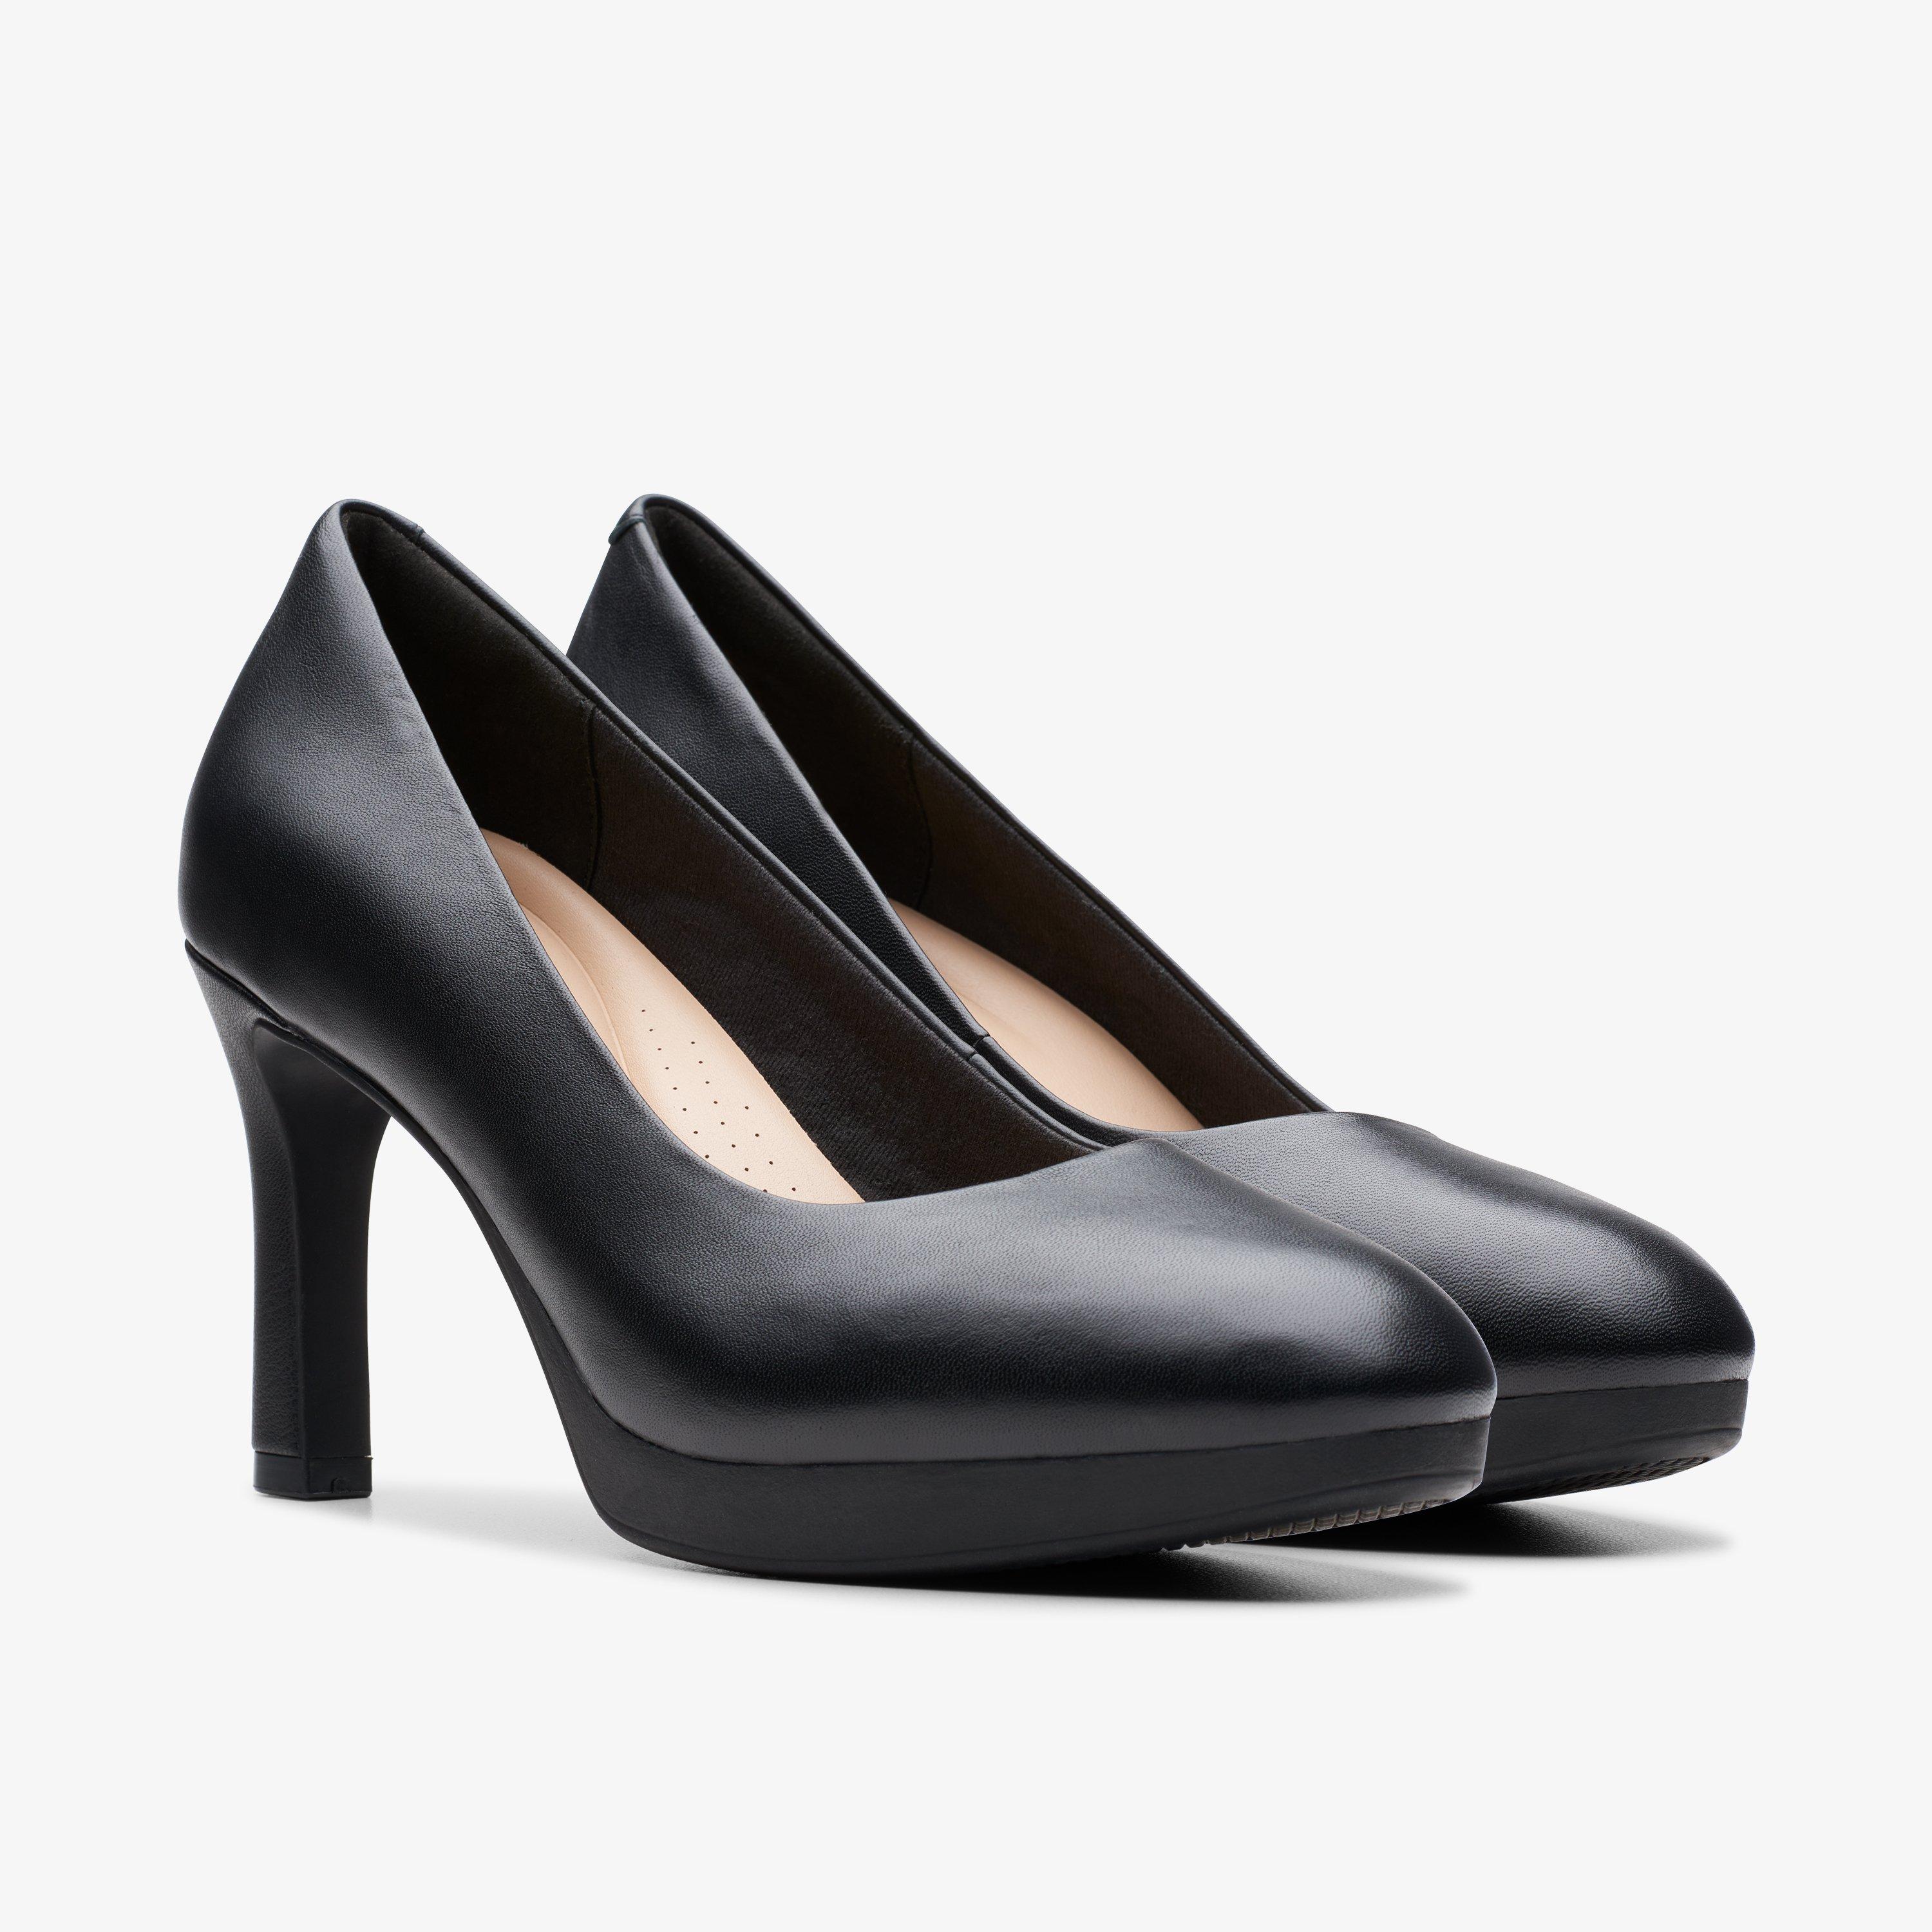 Women's Workwear Shoes - Everyday Office Shoes & Heels